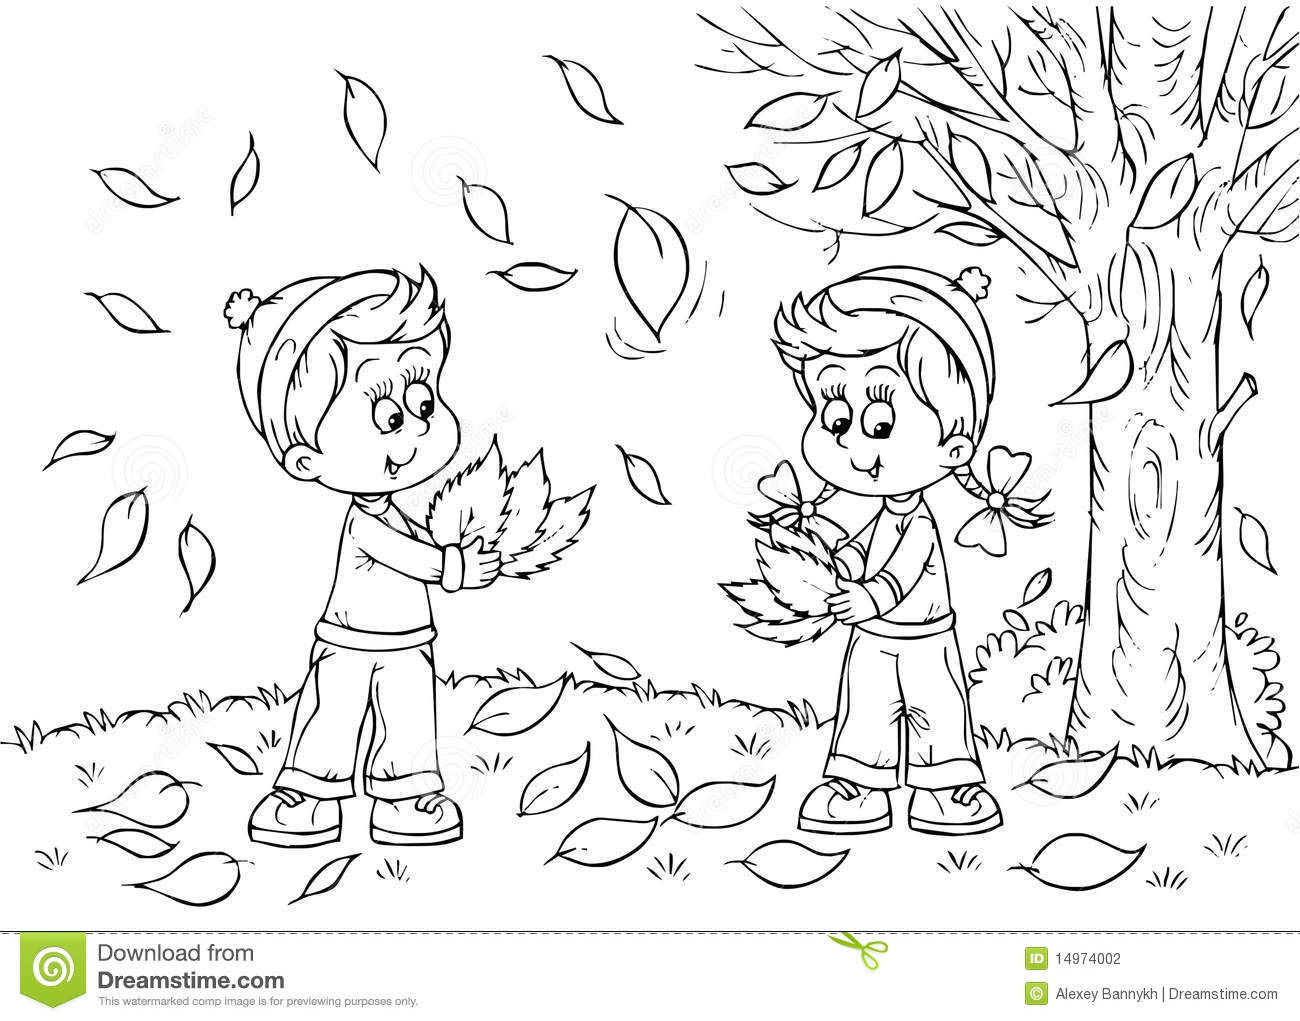 Fun Coloring Pages For Boys Fall
 Children in autumn stock illustration Illustration of